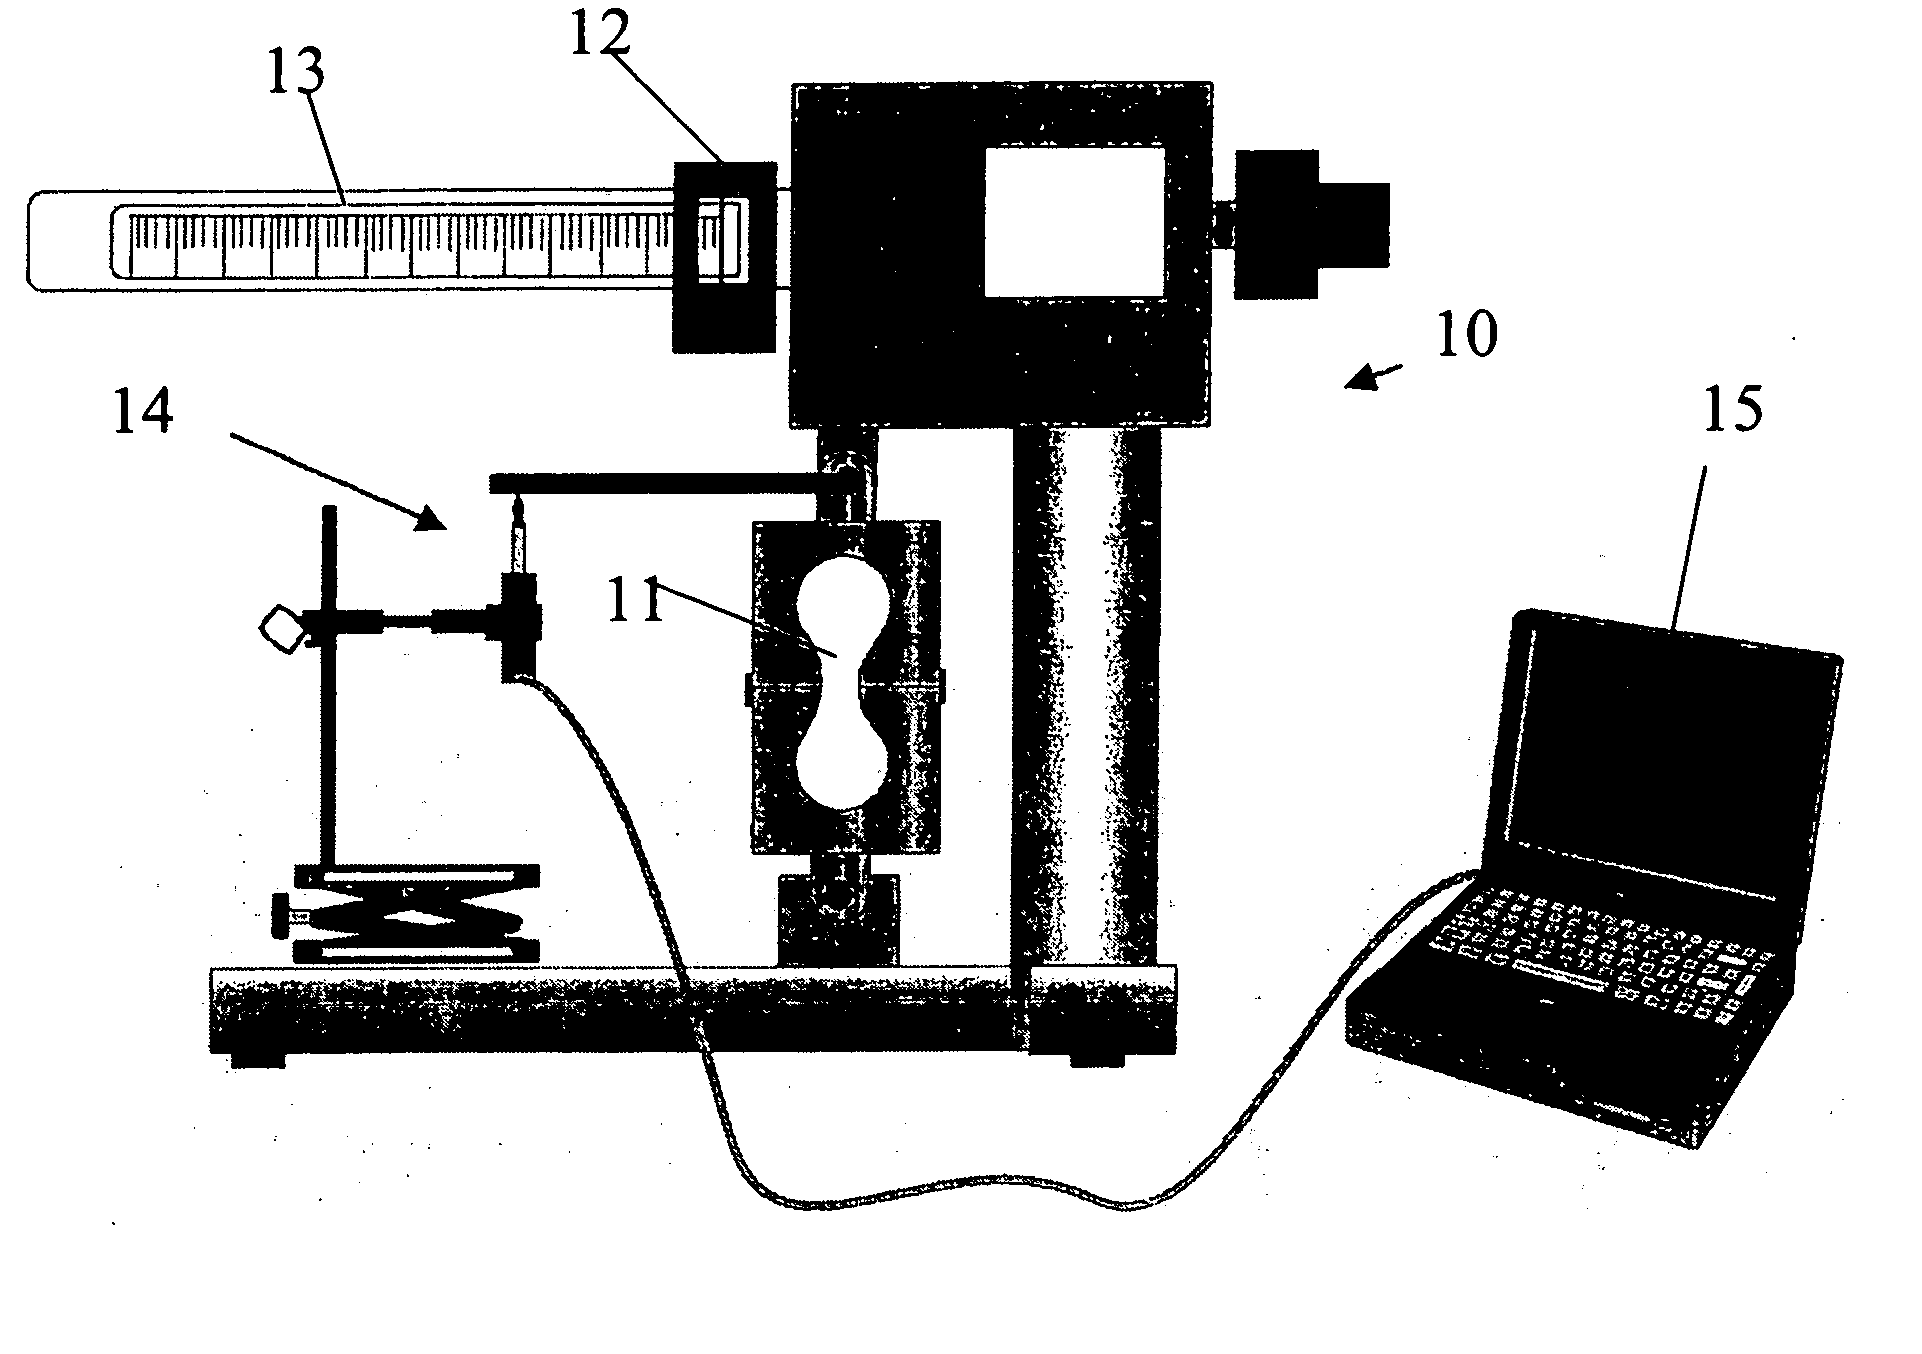 Testing apparatus and method of deriving Young's modulus from tensile stress/strain relationships